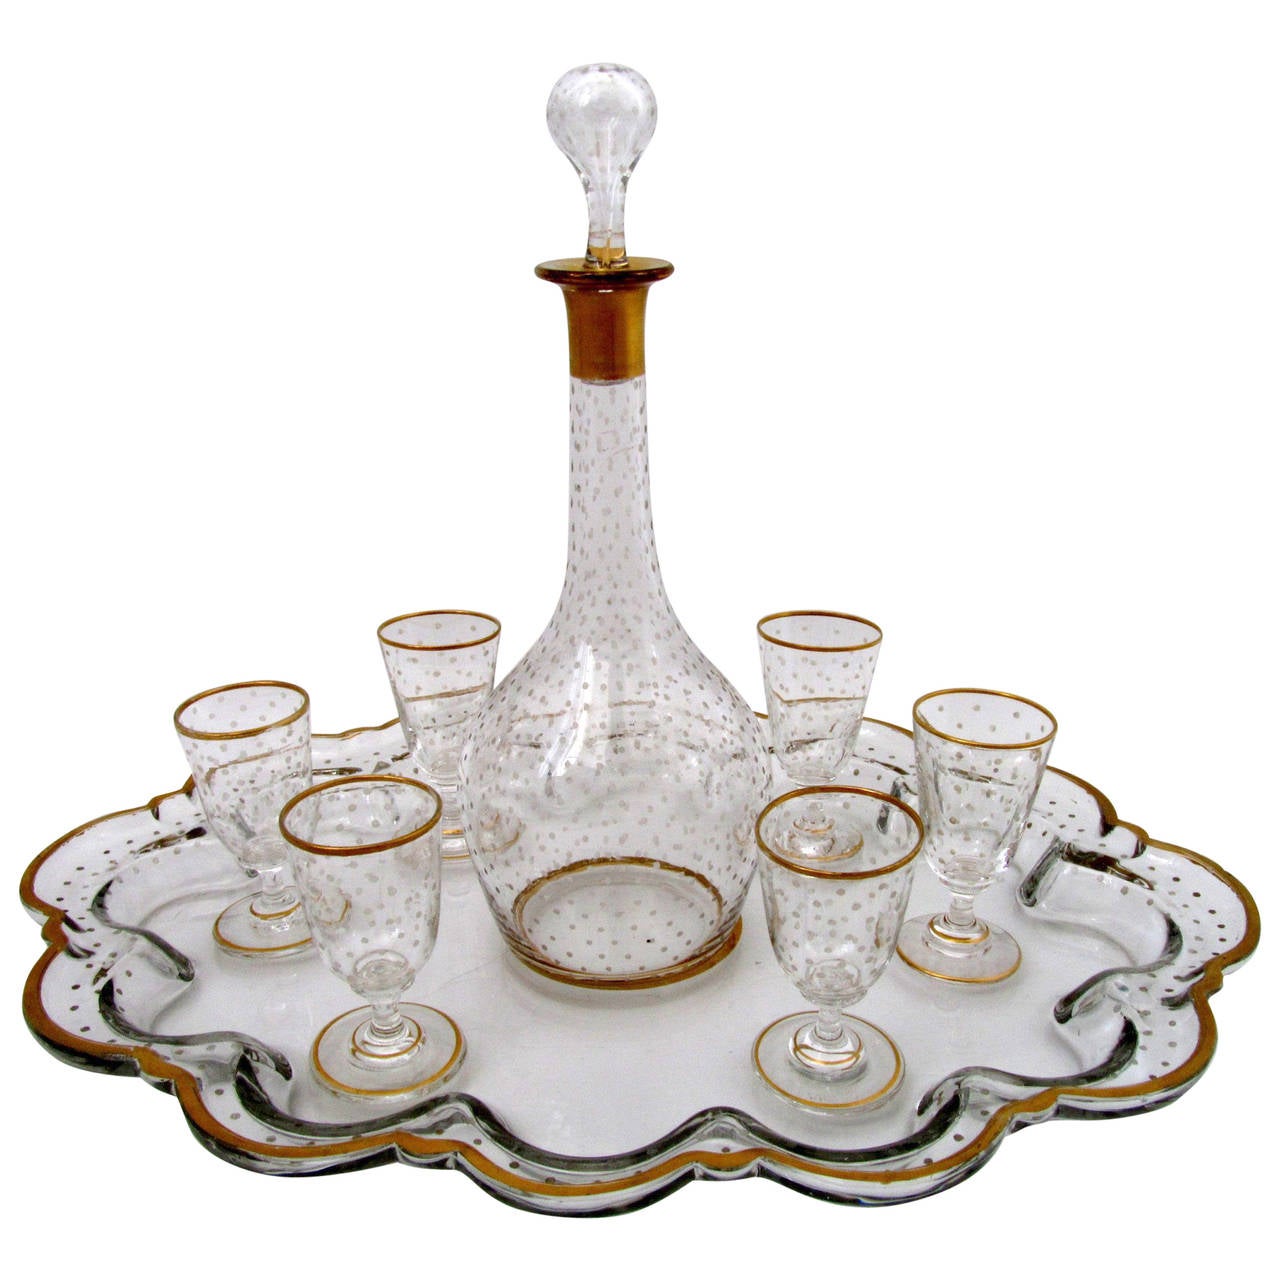 1870s French Gold Enamel Crystal Baccarat Liquor or Aperitif Service 8  pc For Sale